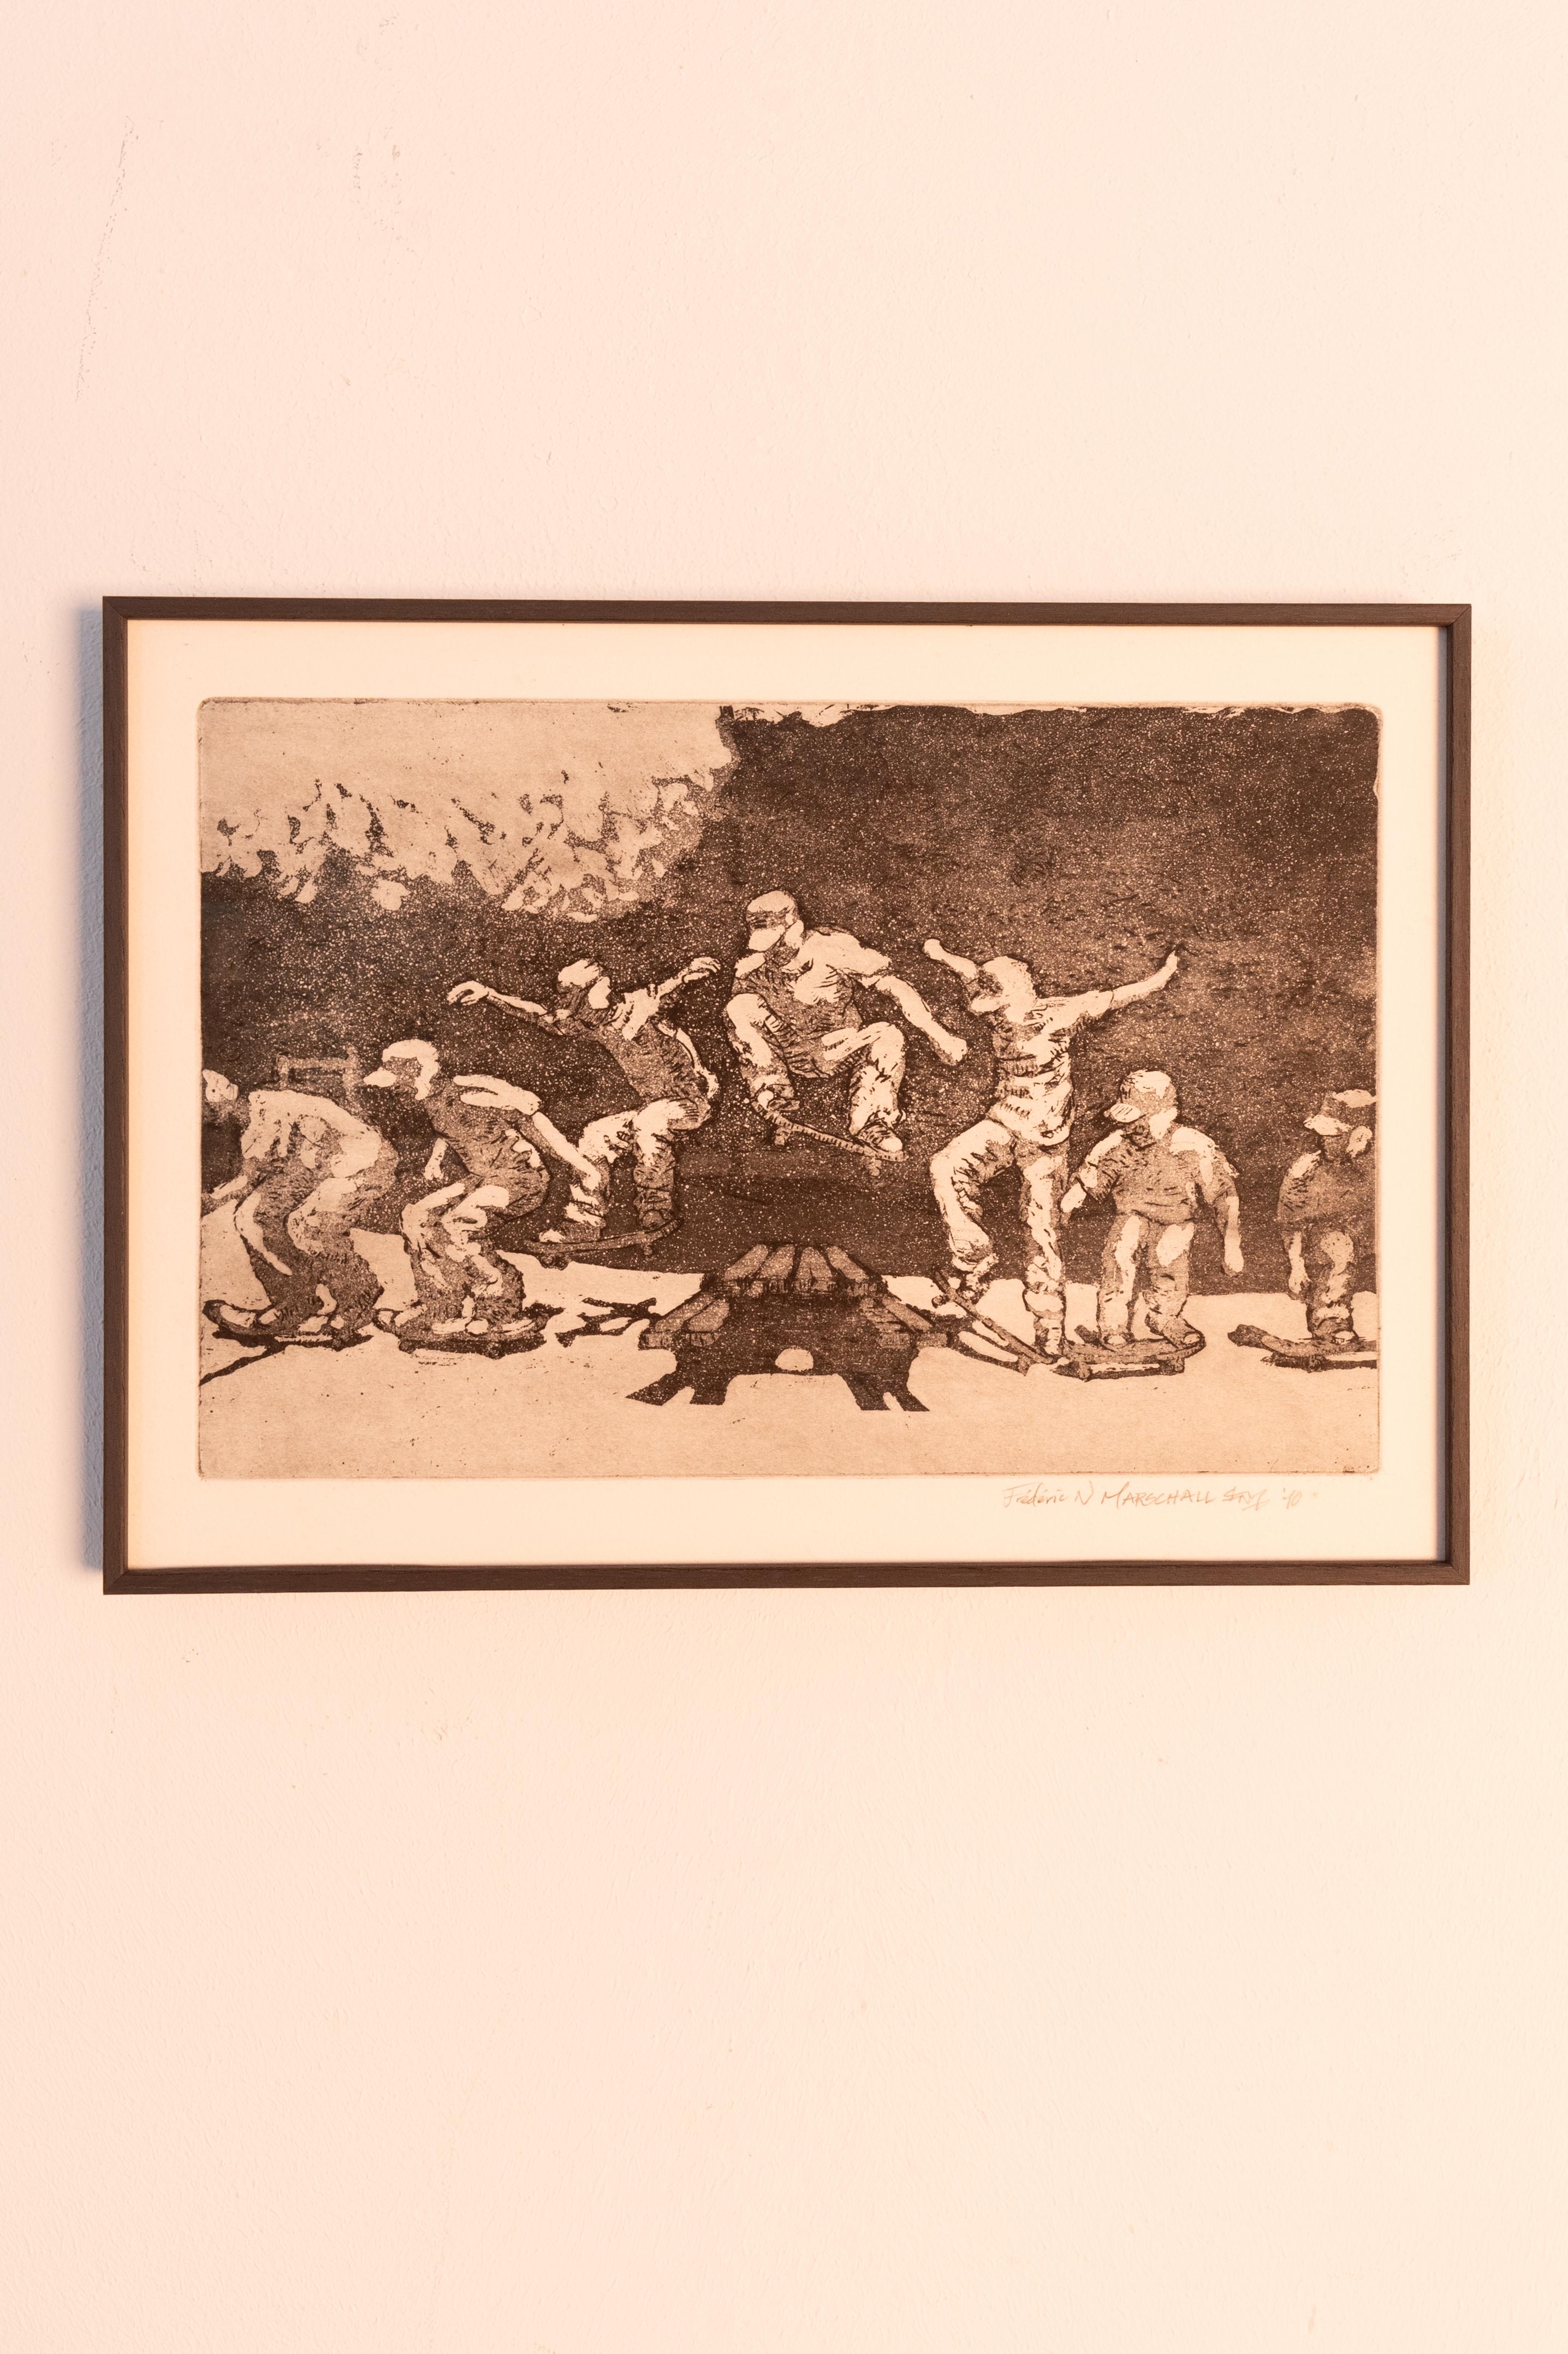 1 etching and 1 aquatint of skating youngsters, made by illustrator and animator Frederic Marschall. 

The aquatint is a negative of the etching. Both were put in a new aluminum frame with non-reflecting museum glass. 